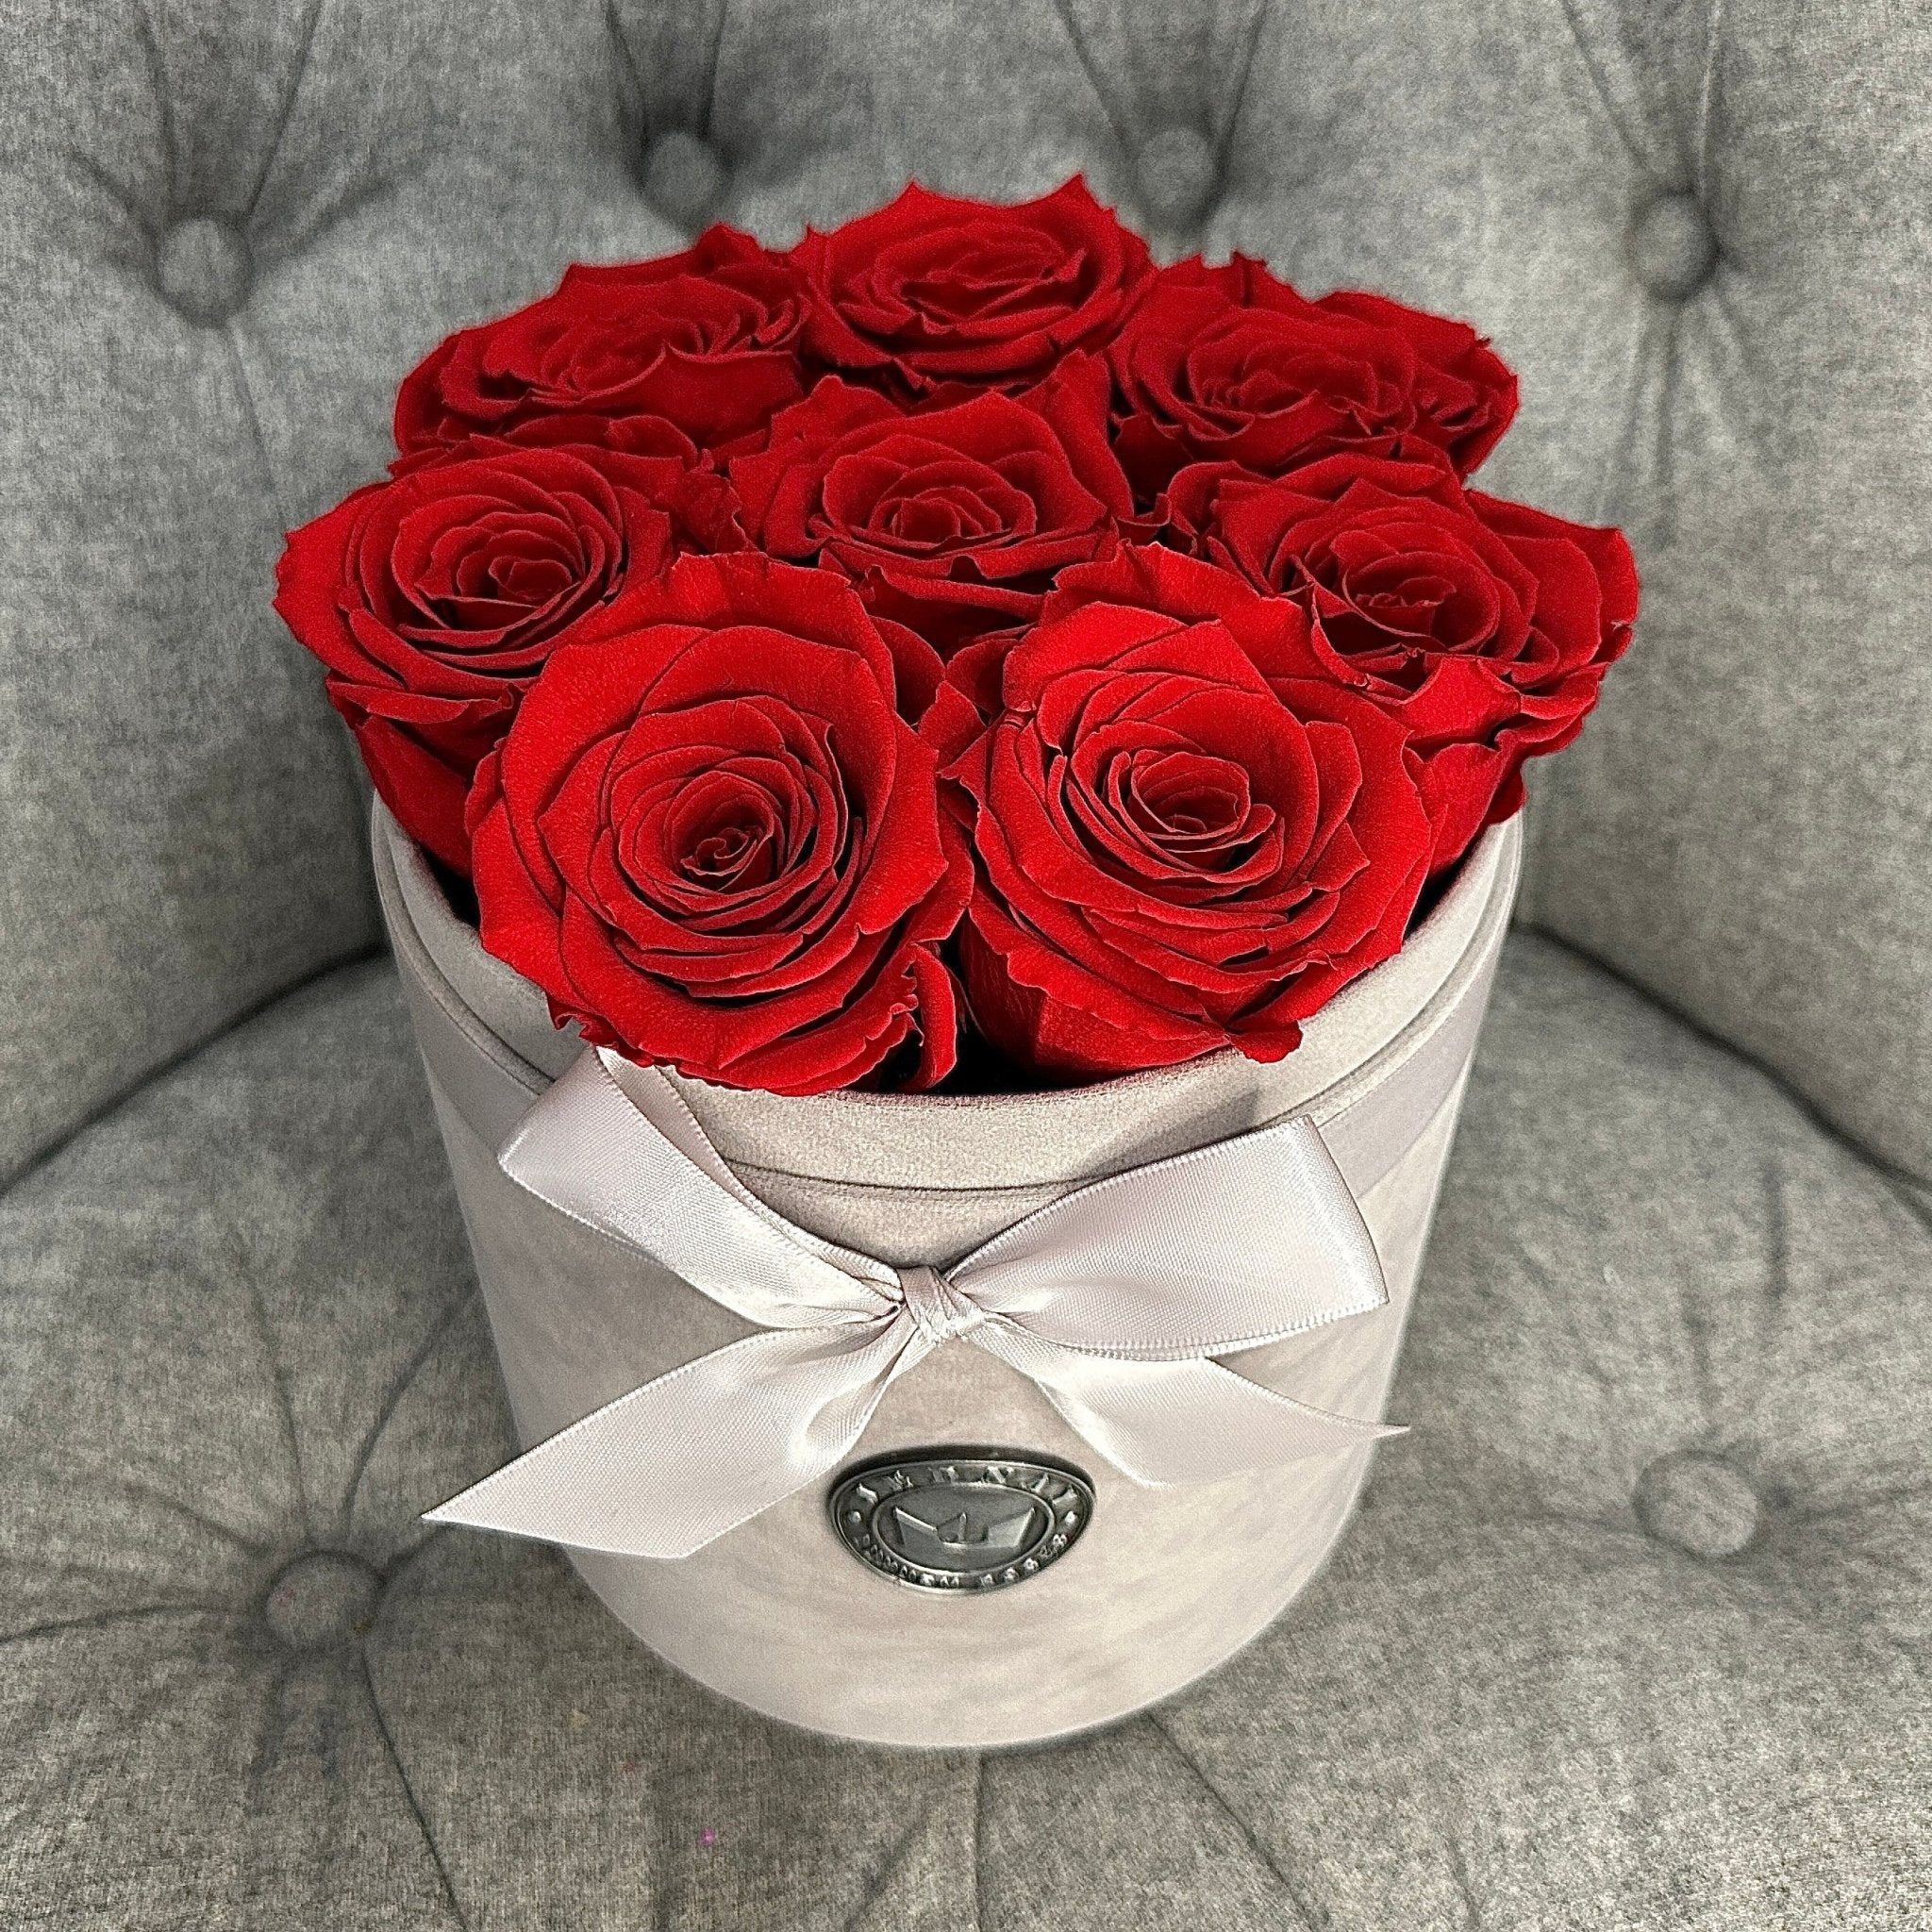 Medium Grey Suede Forever Rose Box - Classic Red Eternal Roses - Jednay Roses